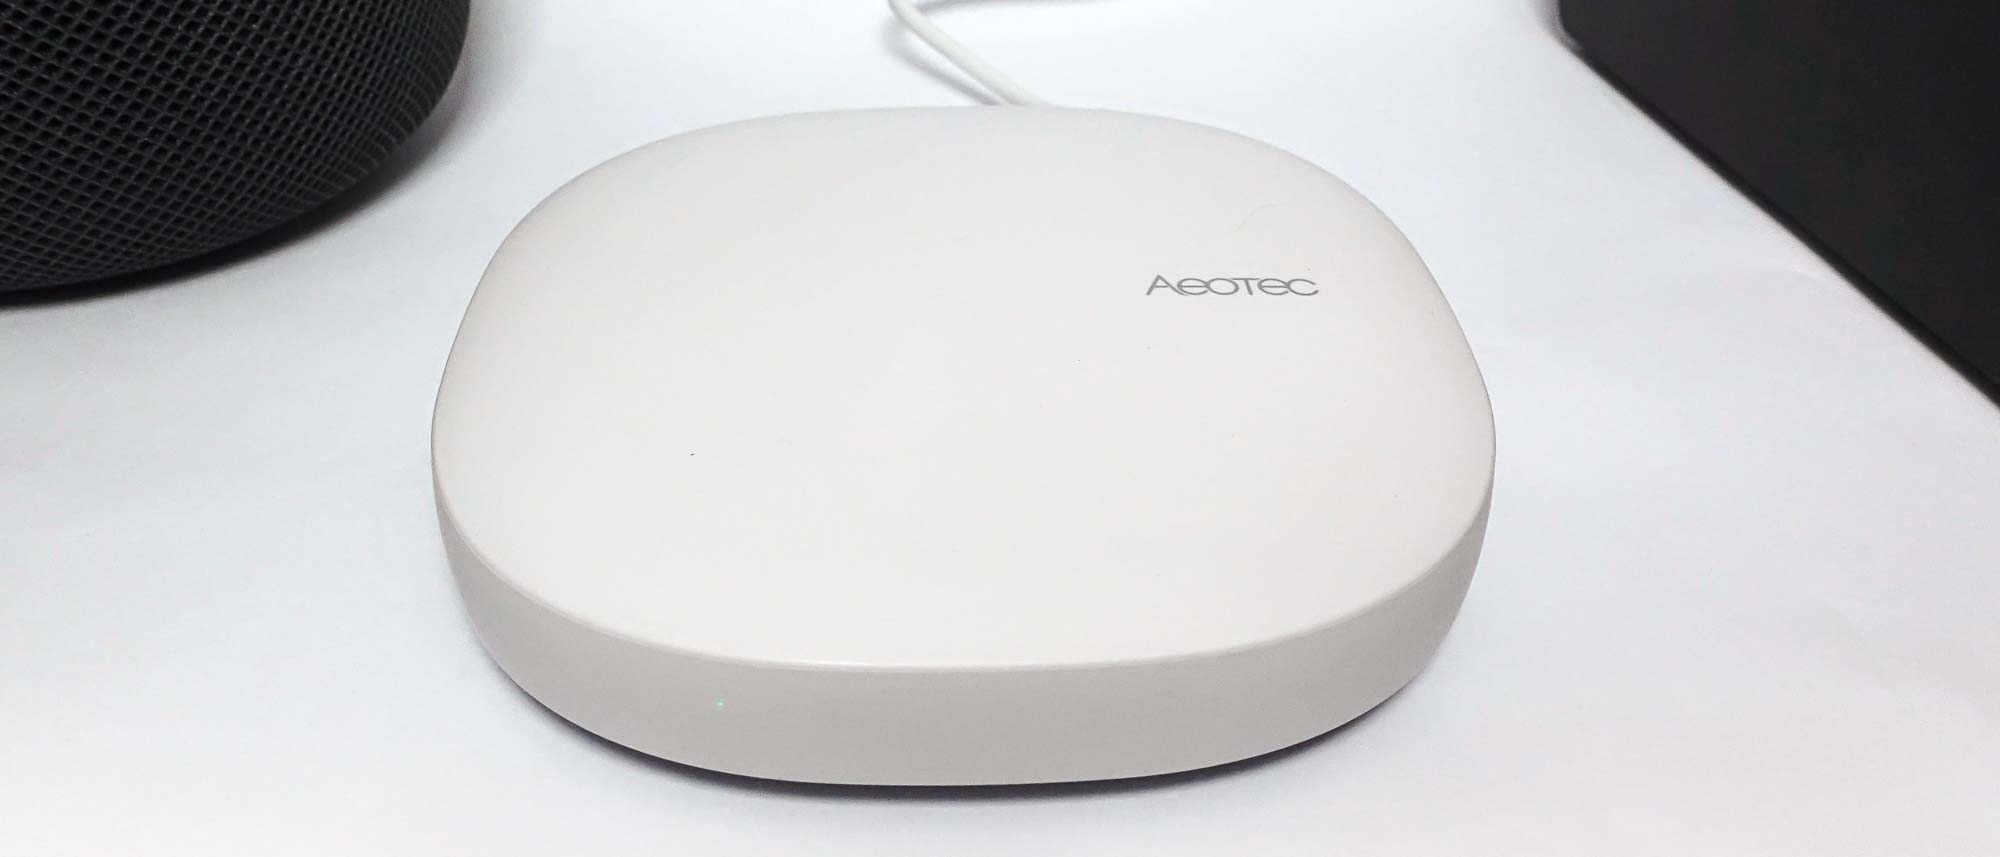 Front view of Aeotec Smart Home Hub